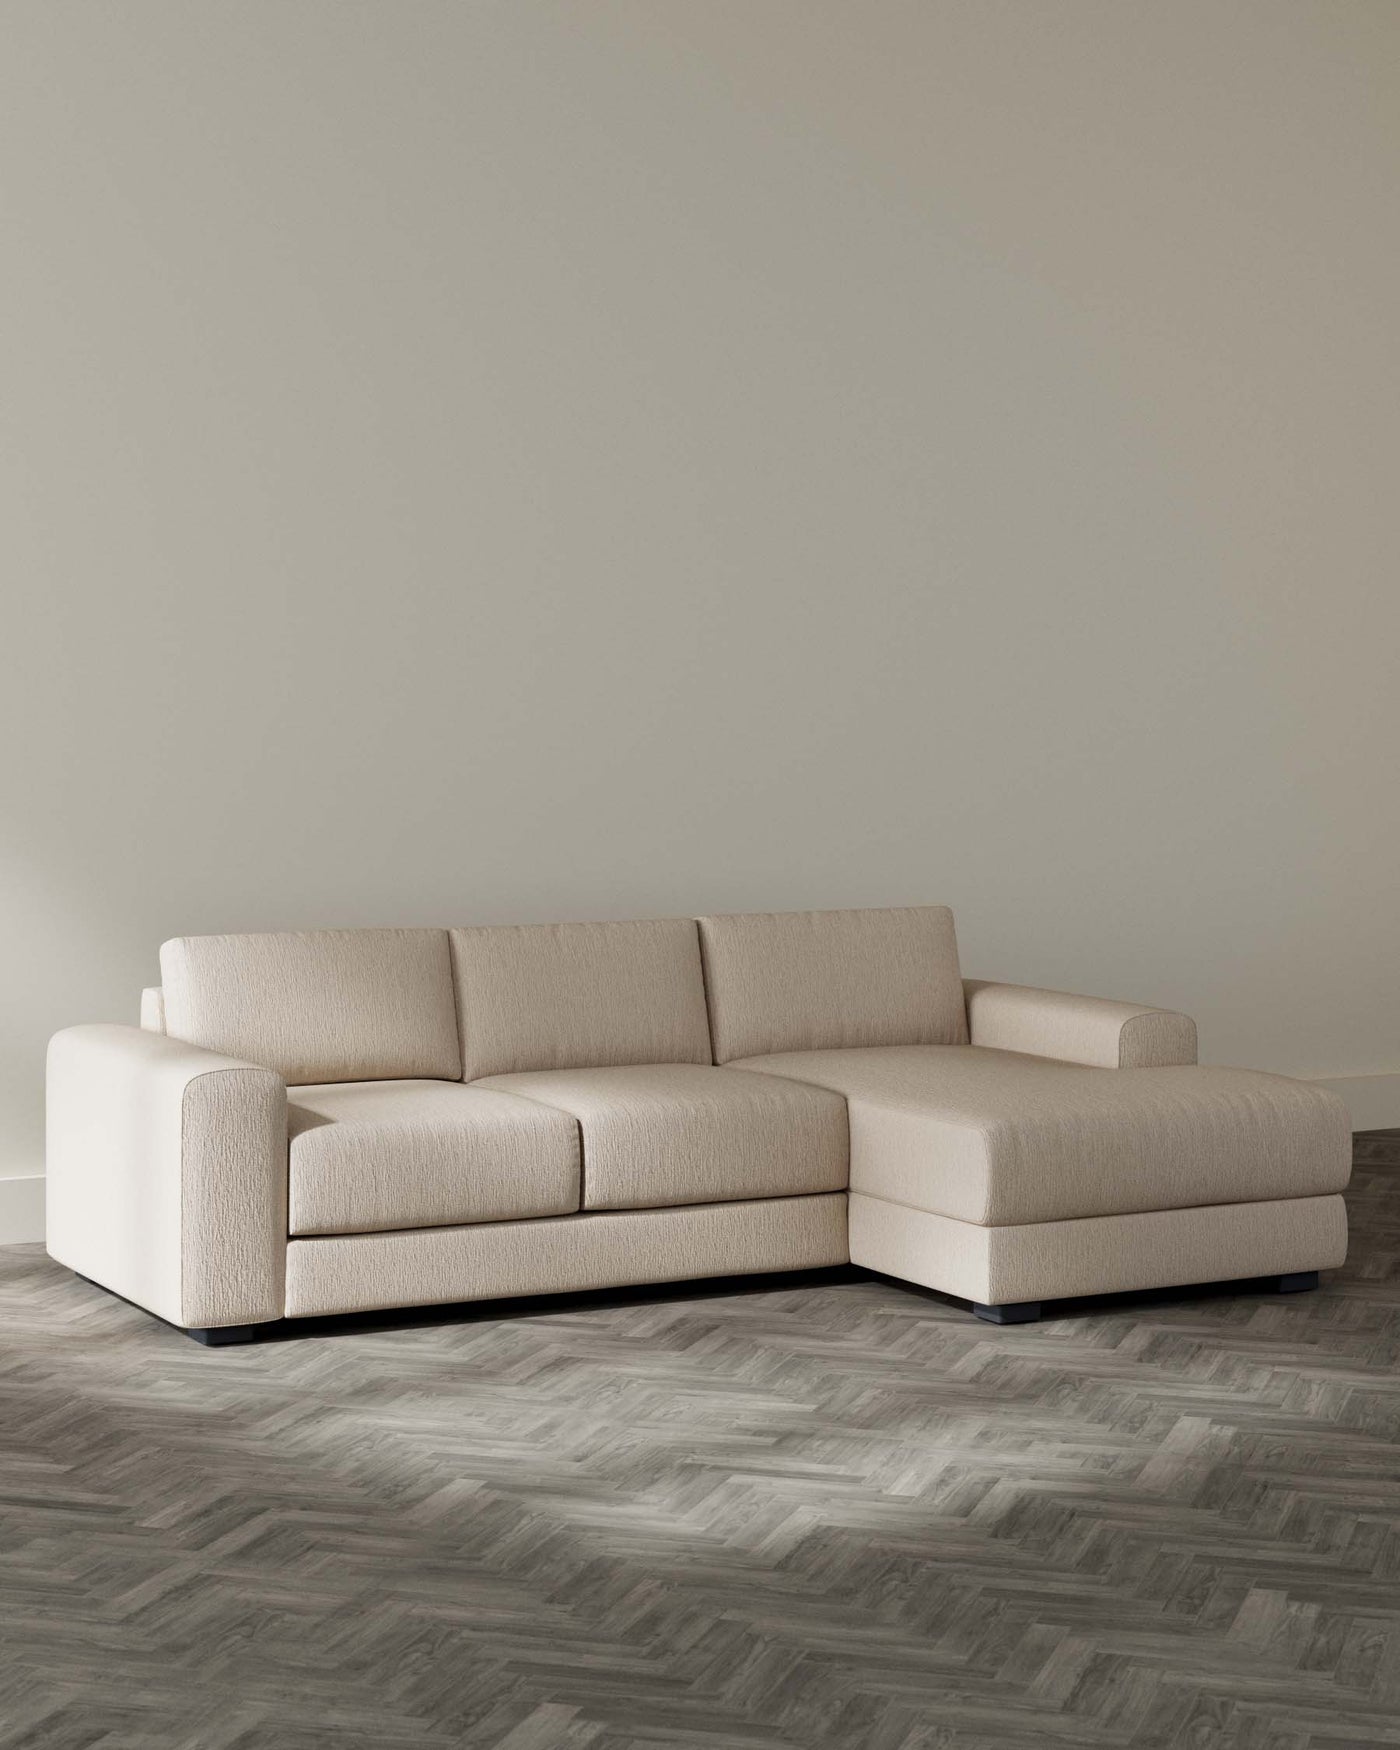 Modern beige L-shaped sectional sofa with clean lines and a plush finish, set against a neutral wall on a herringbone patterned floor.